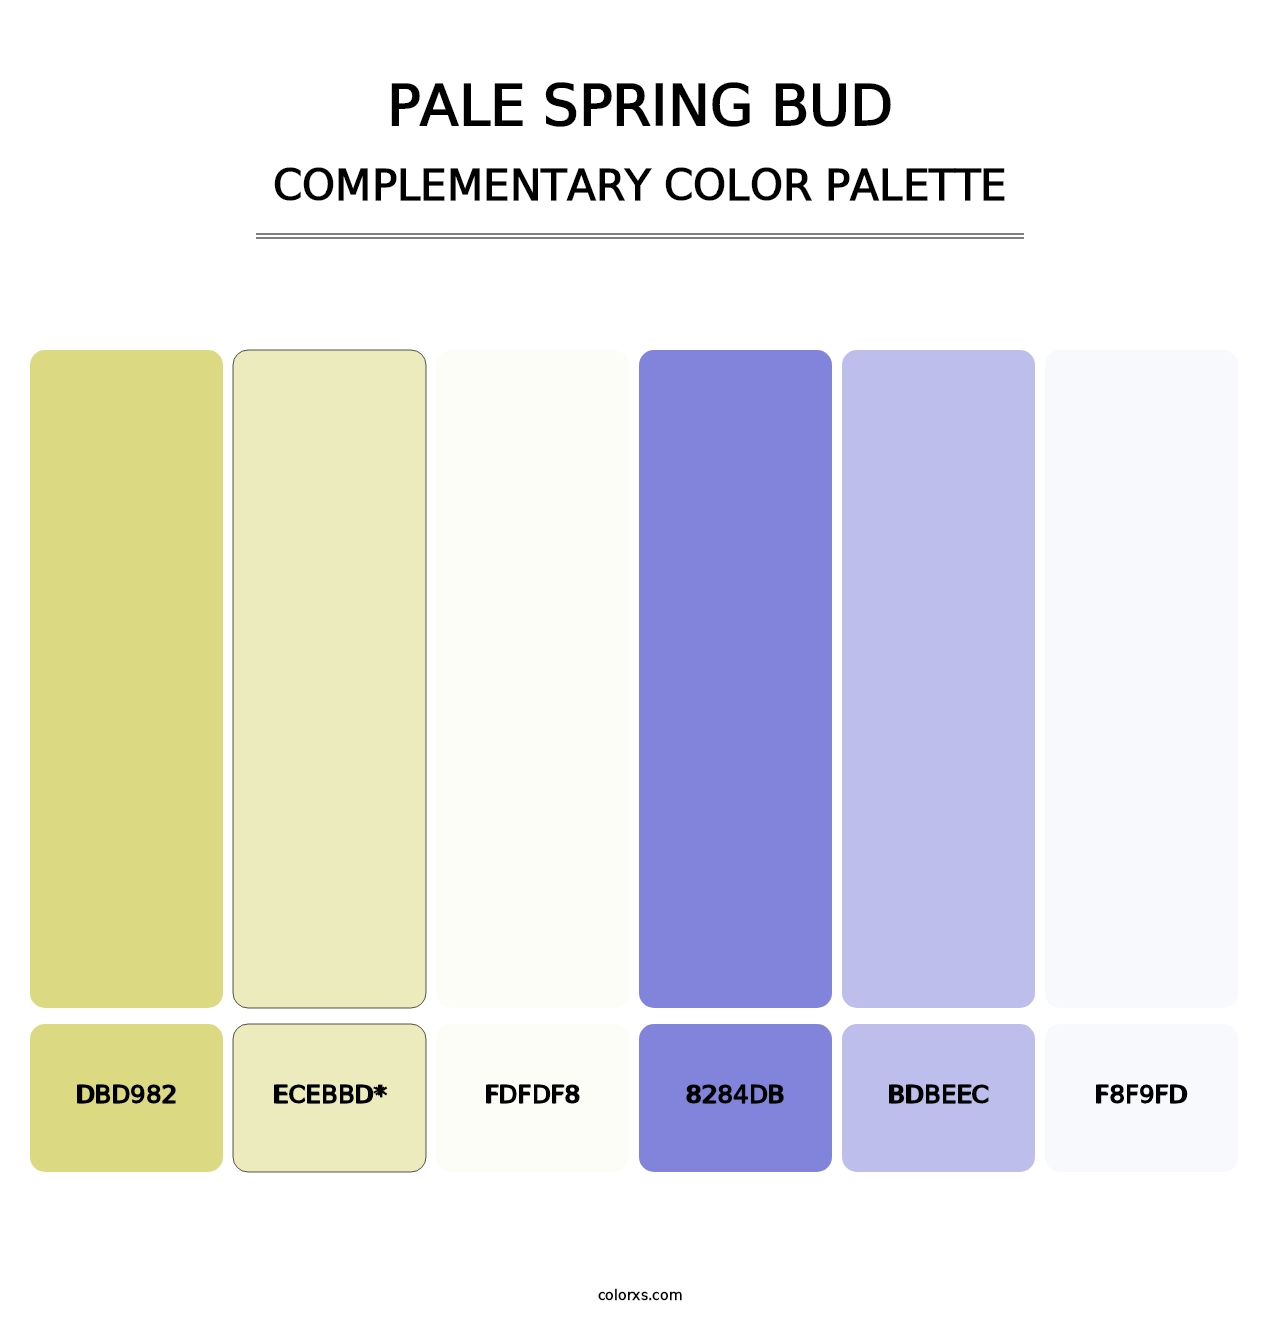 Pale Spring Bud - Complementary Color Palette